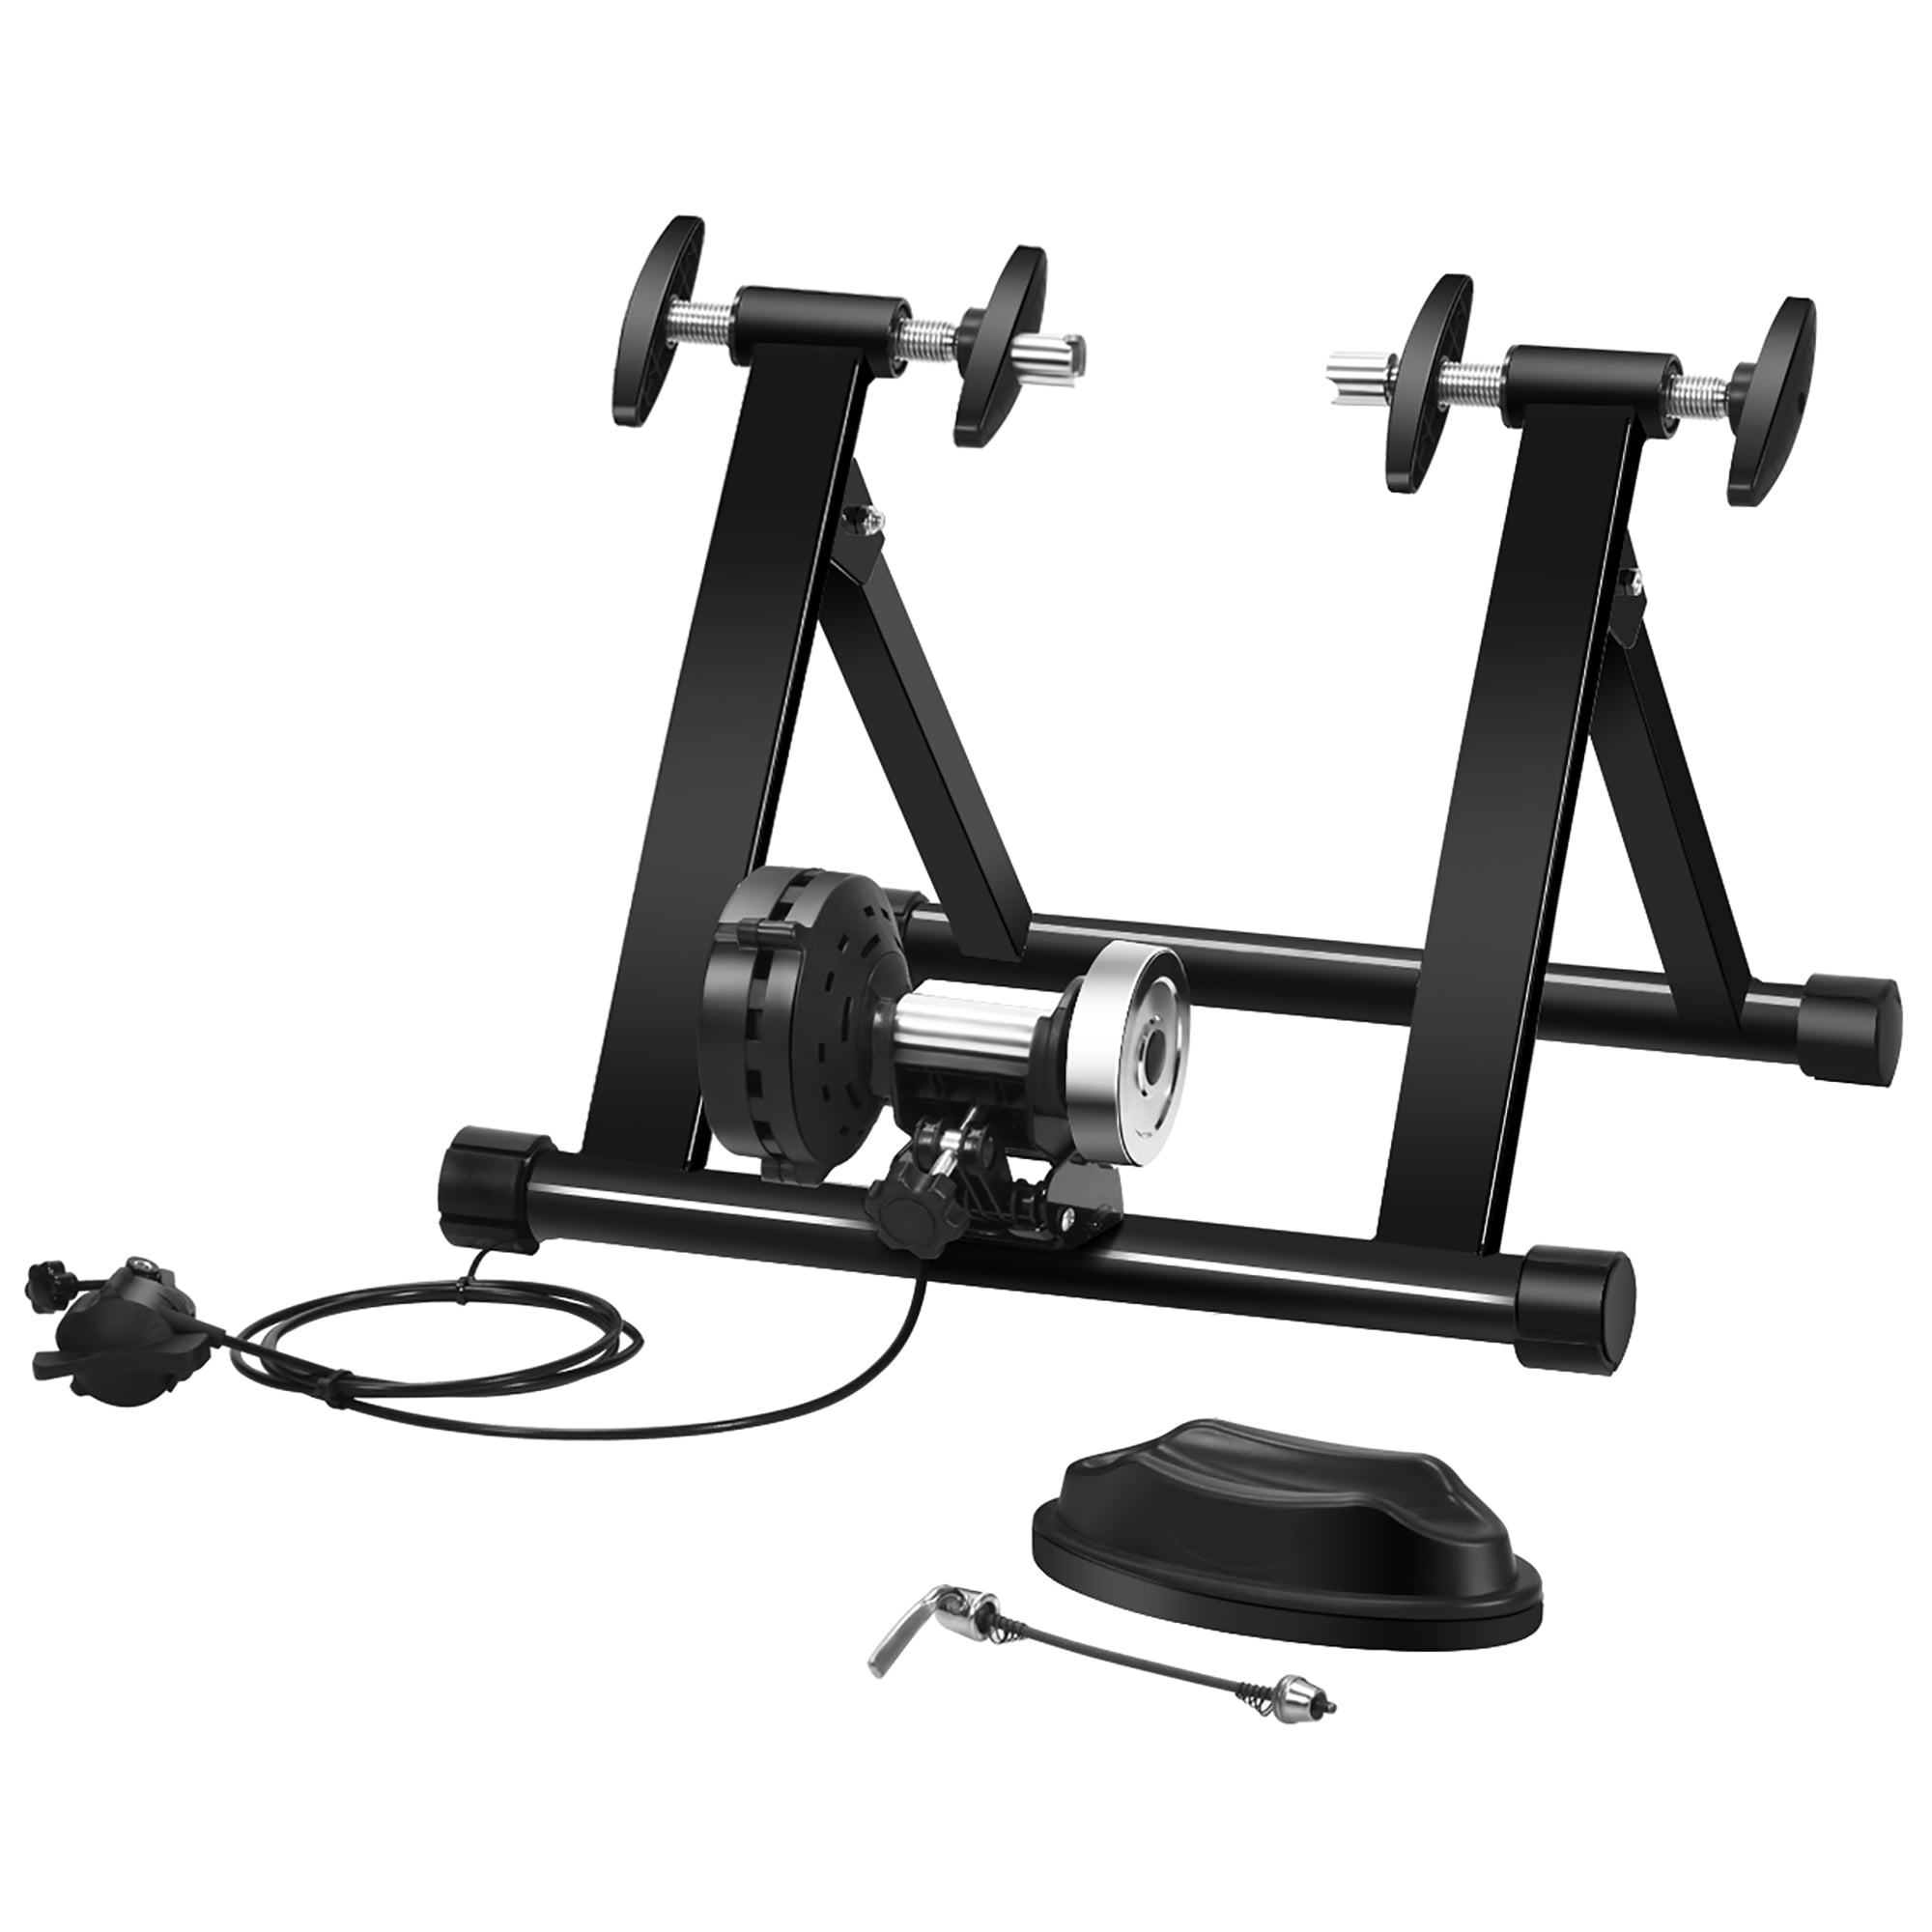 Indoor Exercise Bike Trainer Stand Portable Magnetic 6 Level Resistance Training 